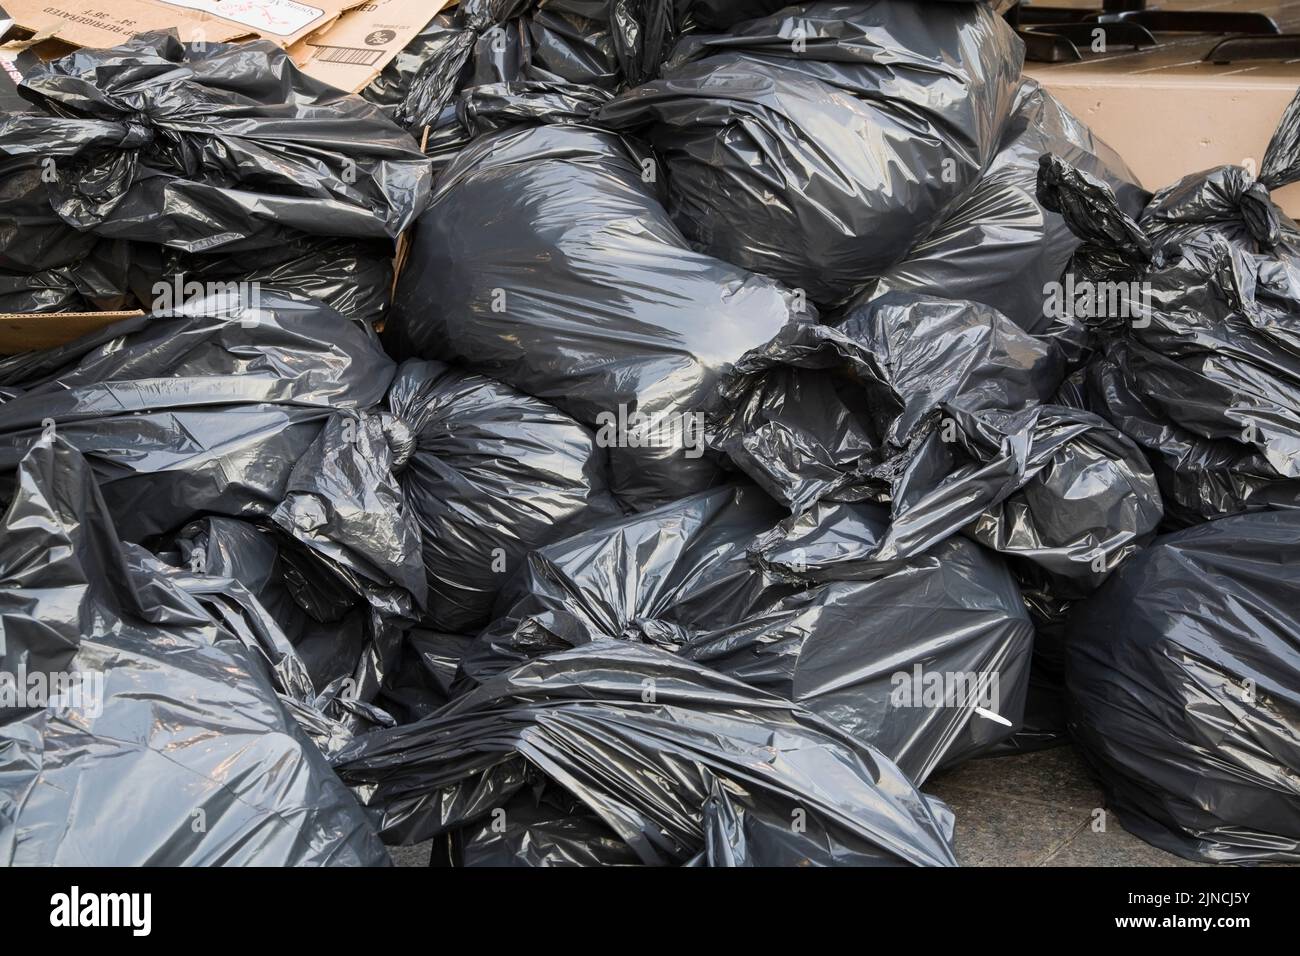 Black plastic garbage bags and flattened cardboard boxes on city sidewalk, Quebec, Canada Stock Photo